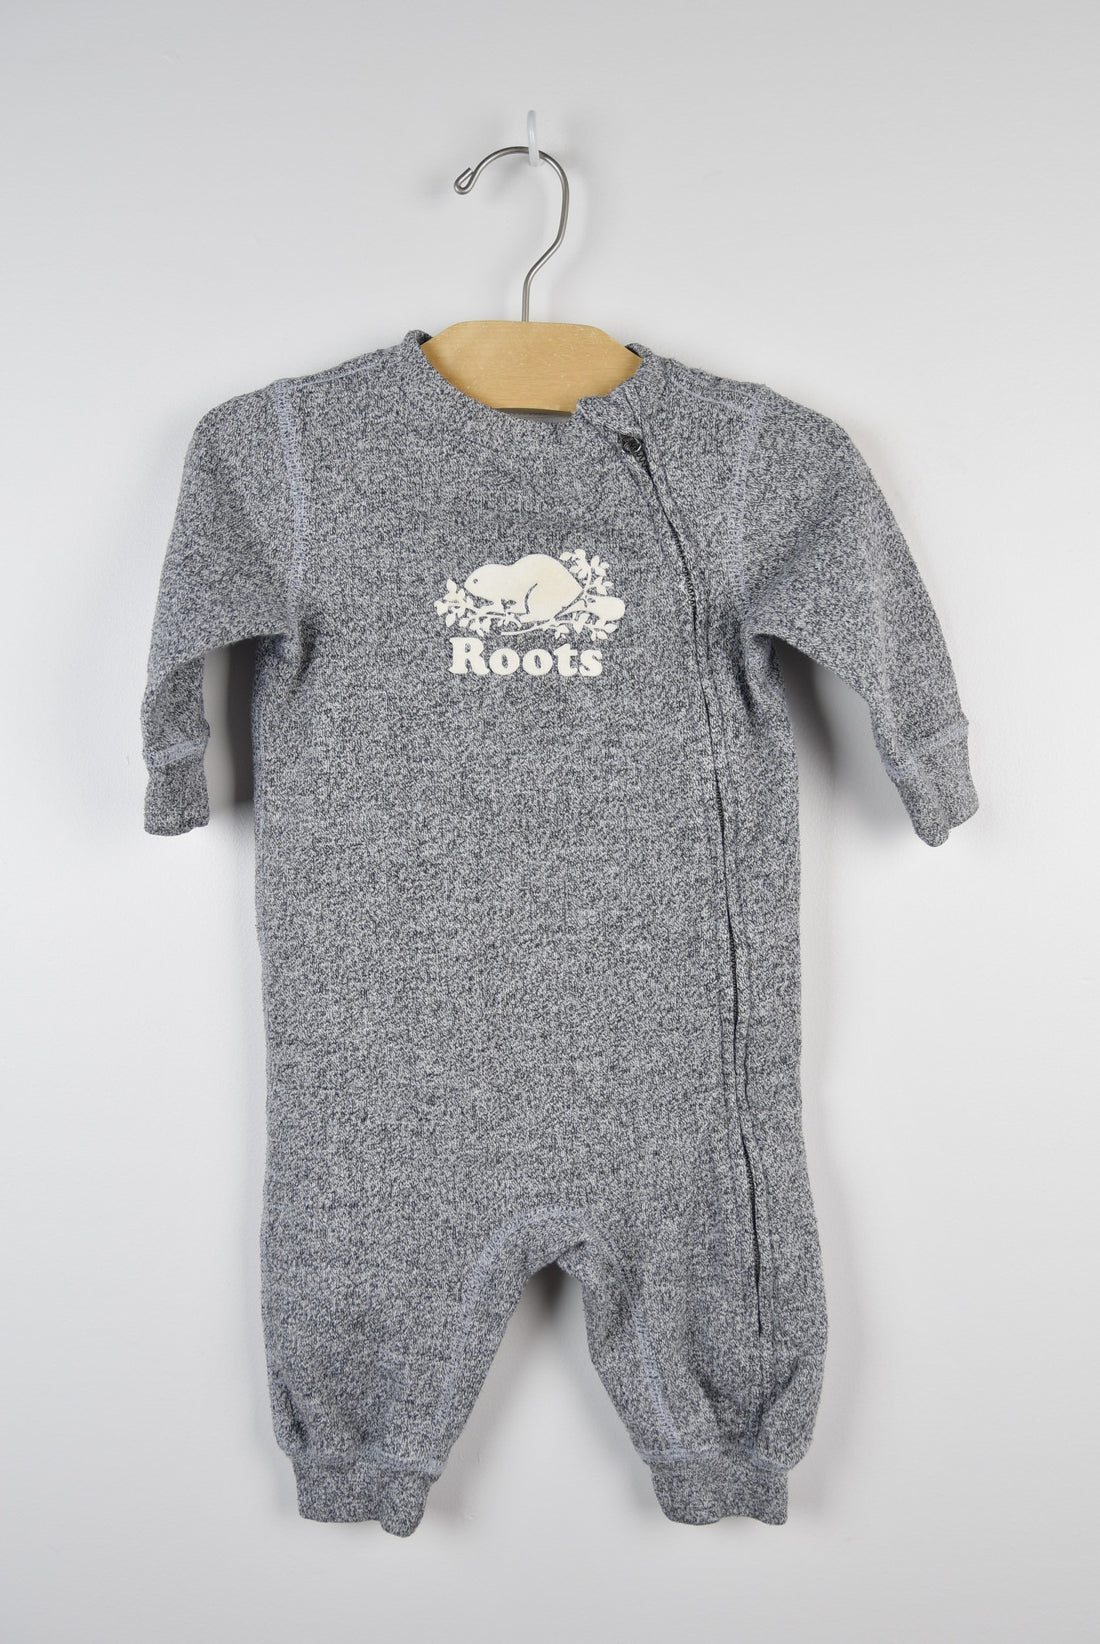 Roots Branded Romper (6-12M)